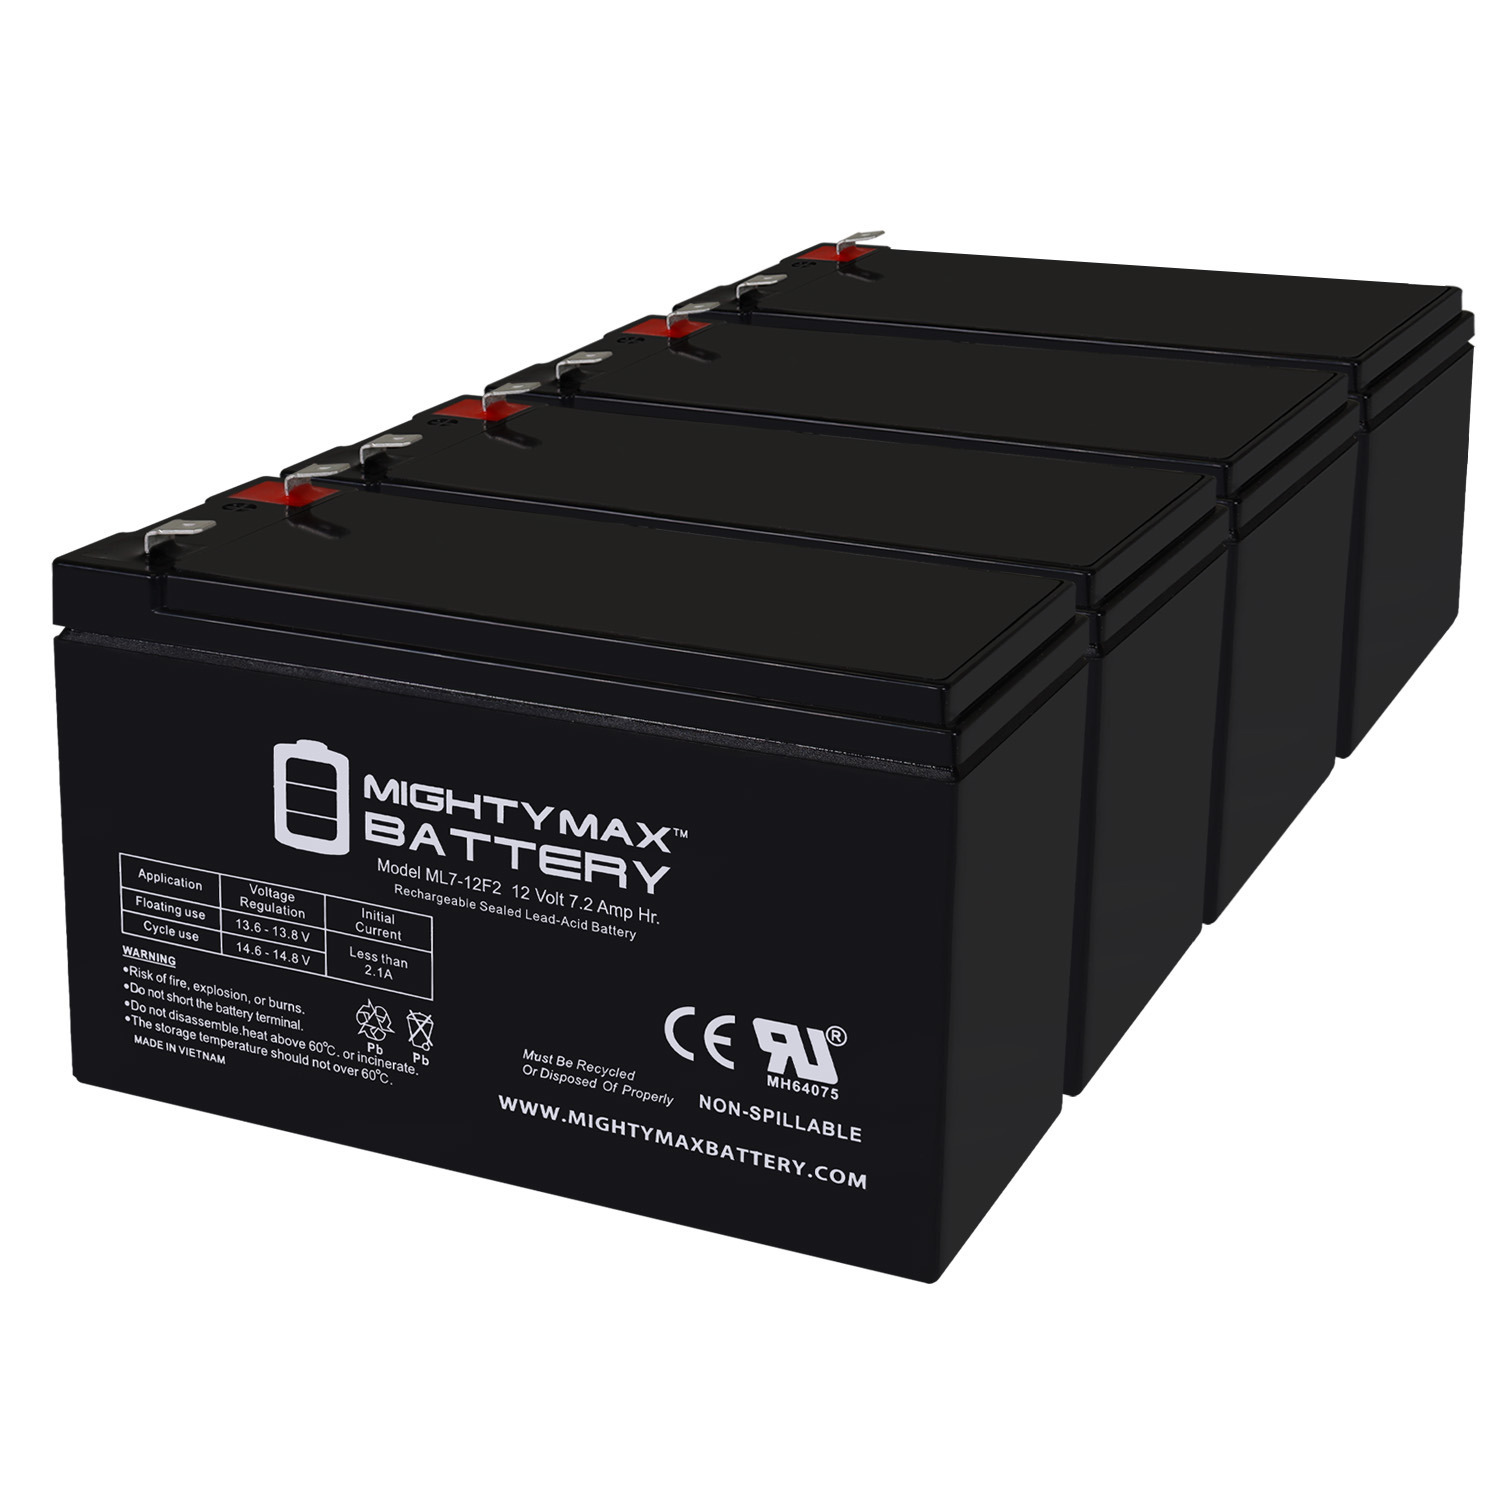 12V 7Ah F2 Replacement Battery for Minuteman E BP3 - 4 Pack